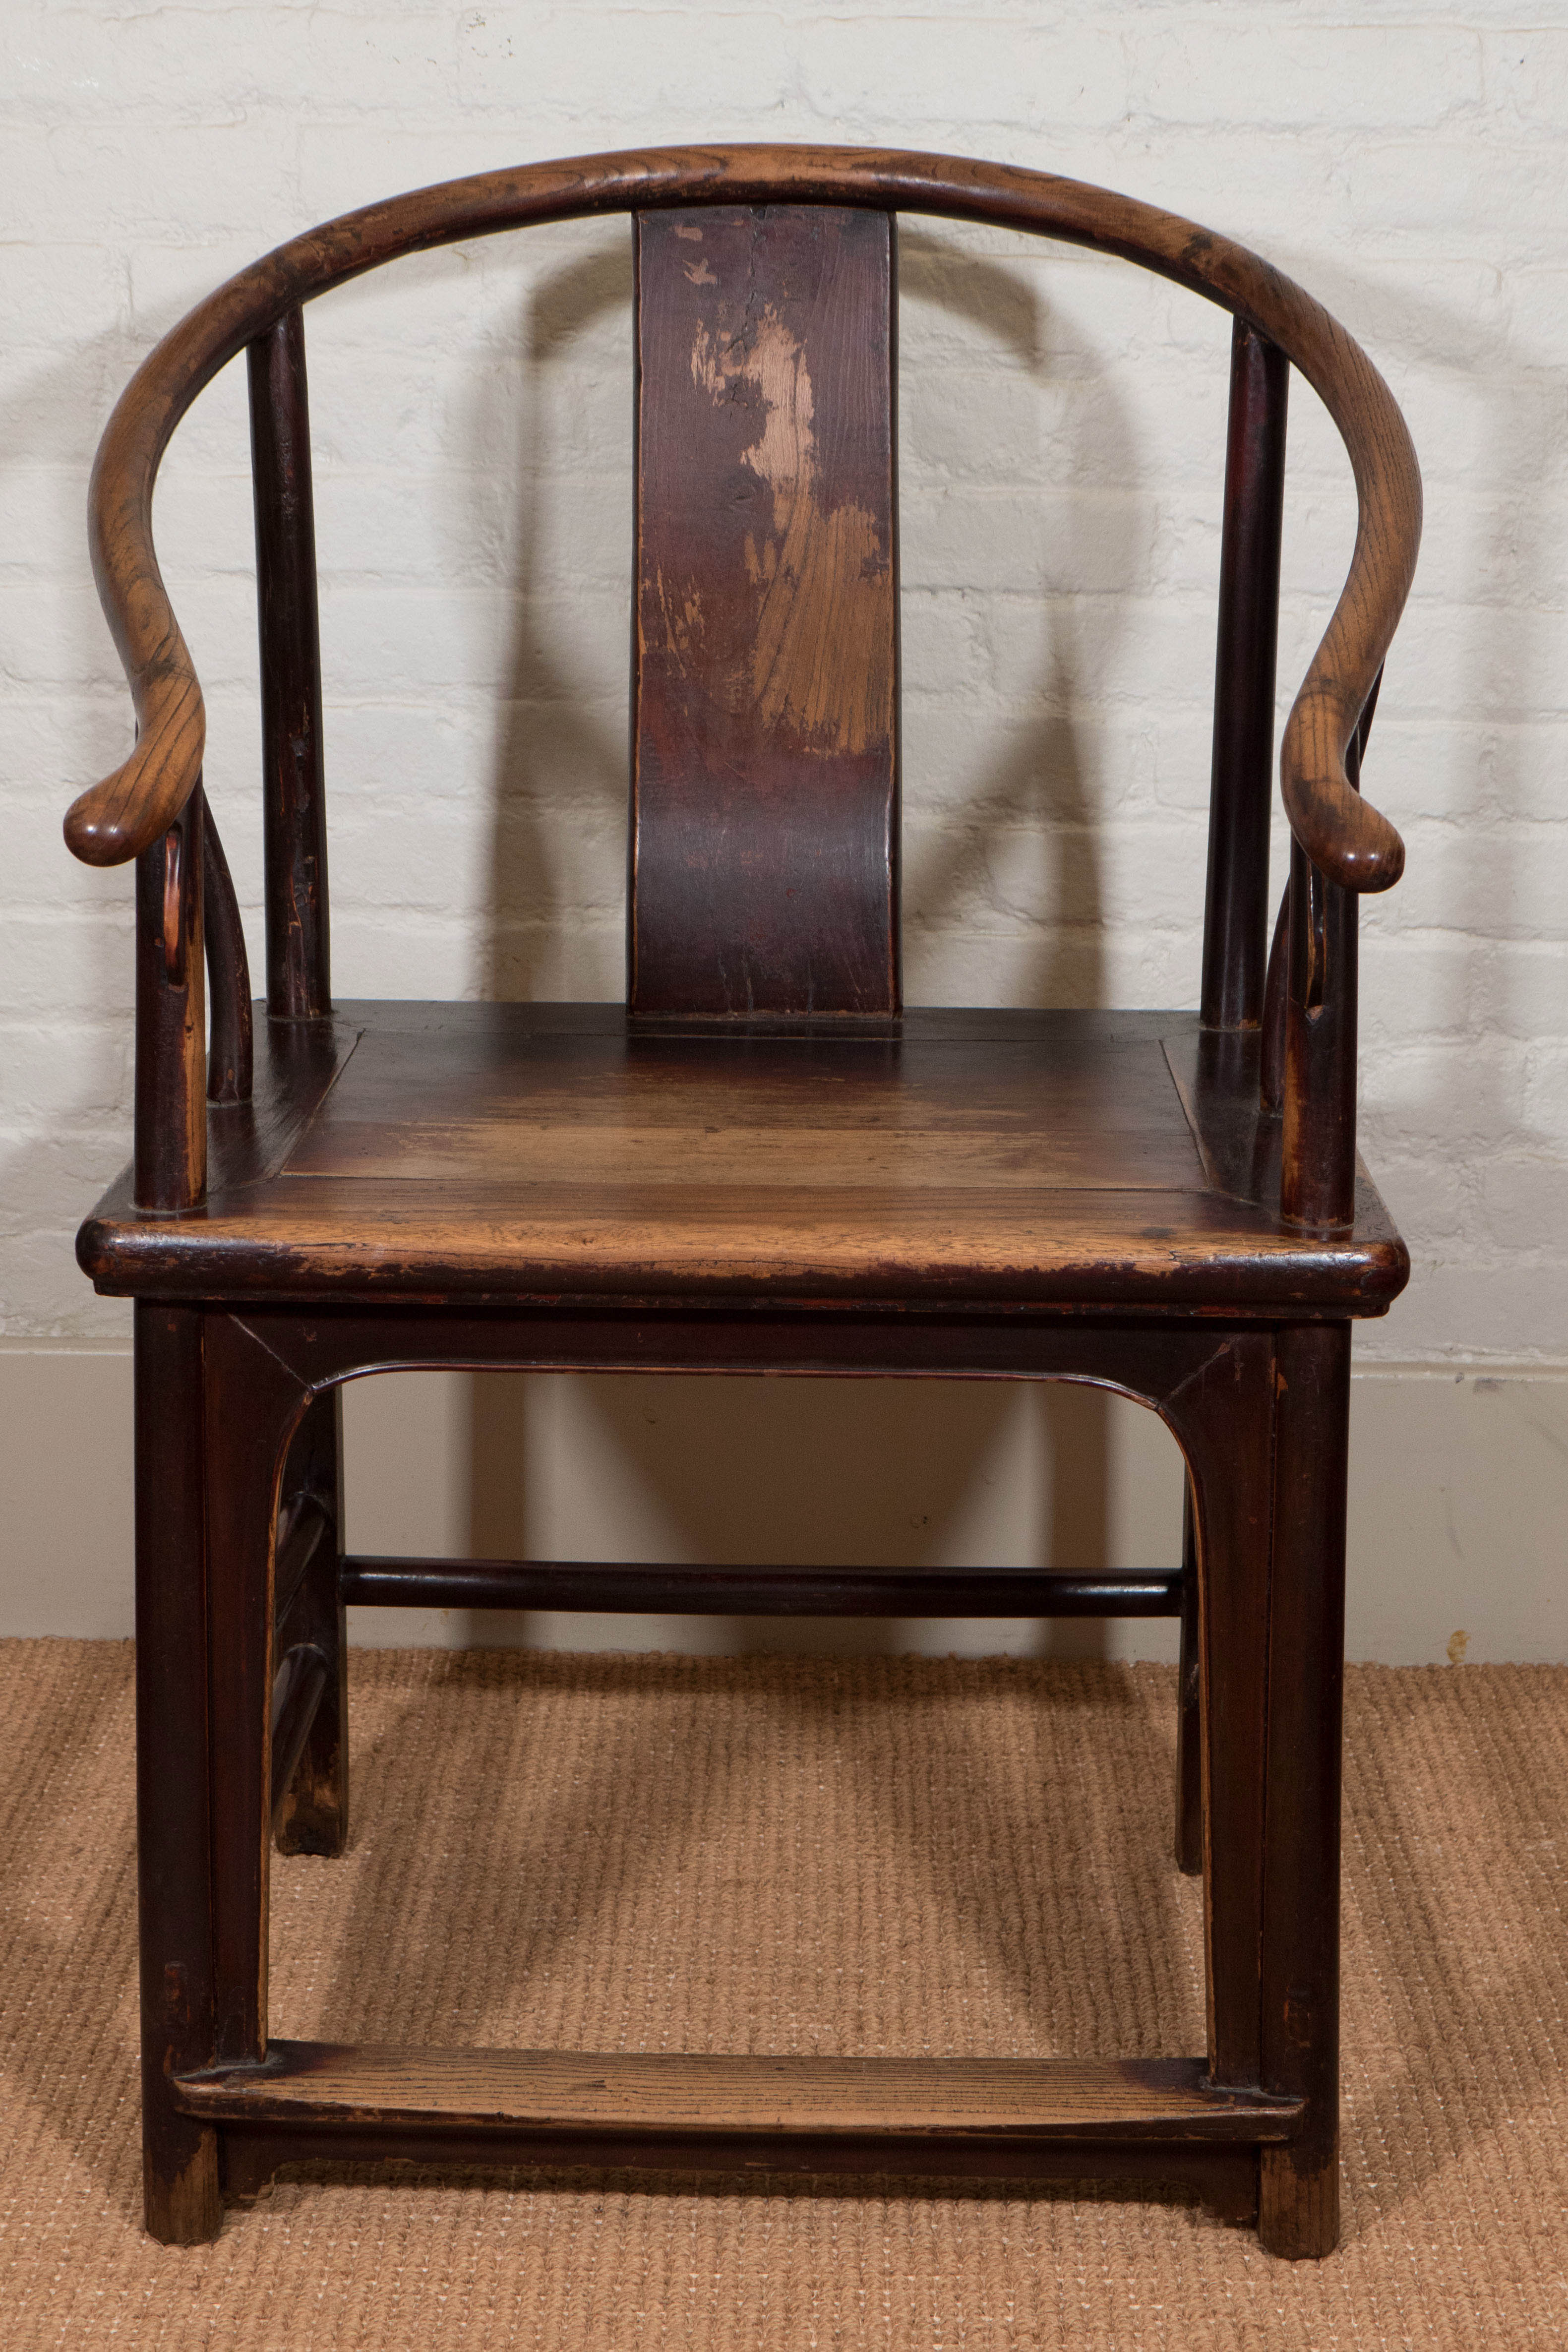 A Pair of 18th Century Chinese Horseshoe Chairs For Sale